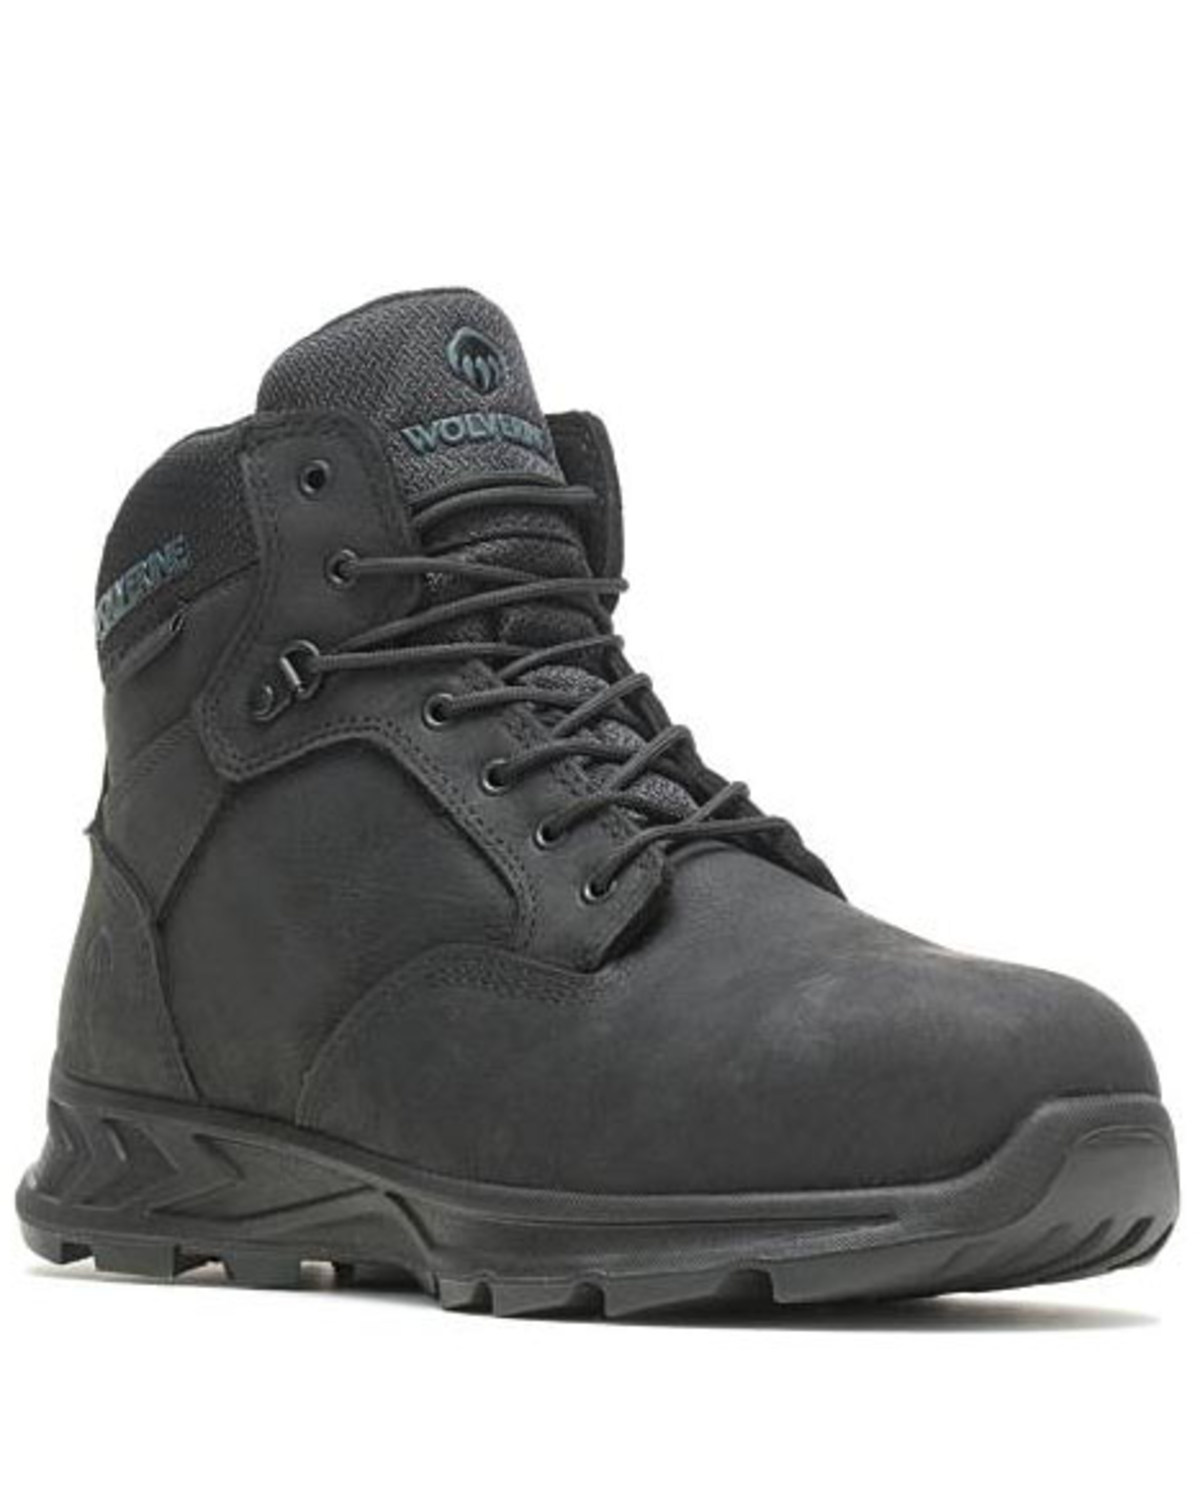 Wolverine Men's Shiftplus LX Work Boots - Alloy Toe